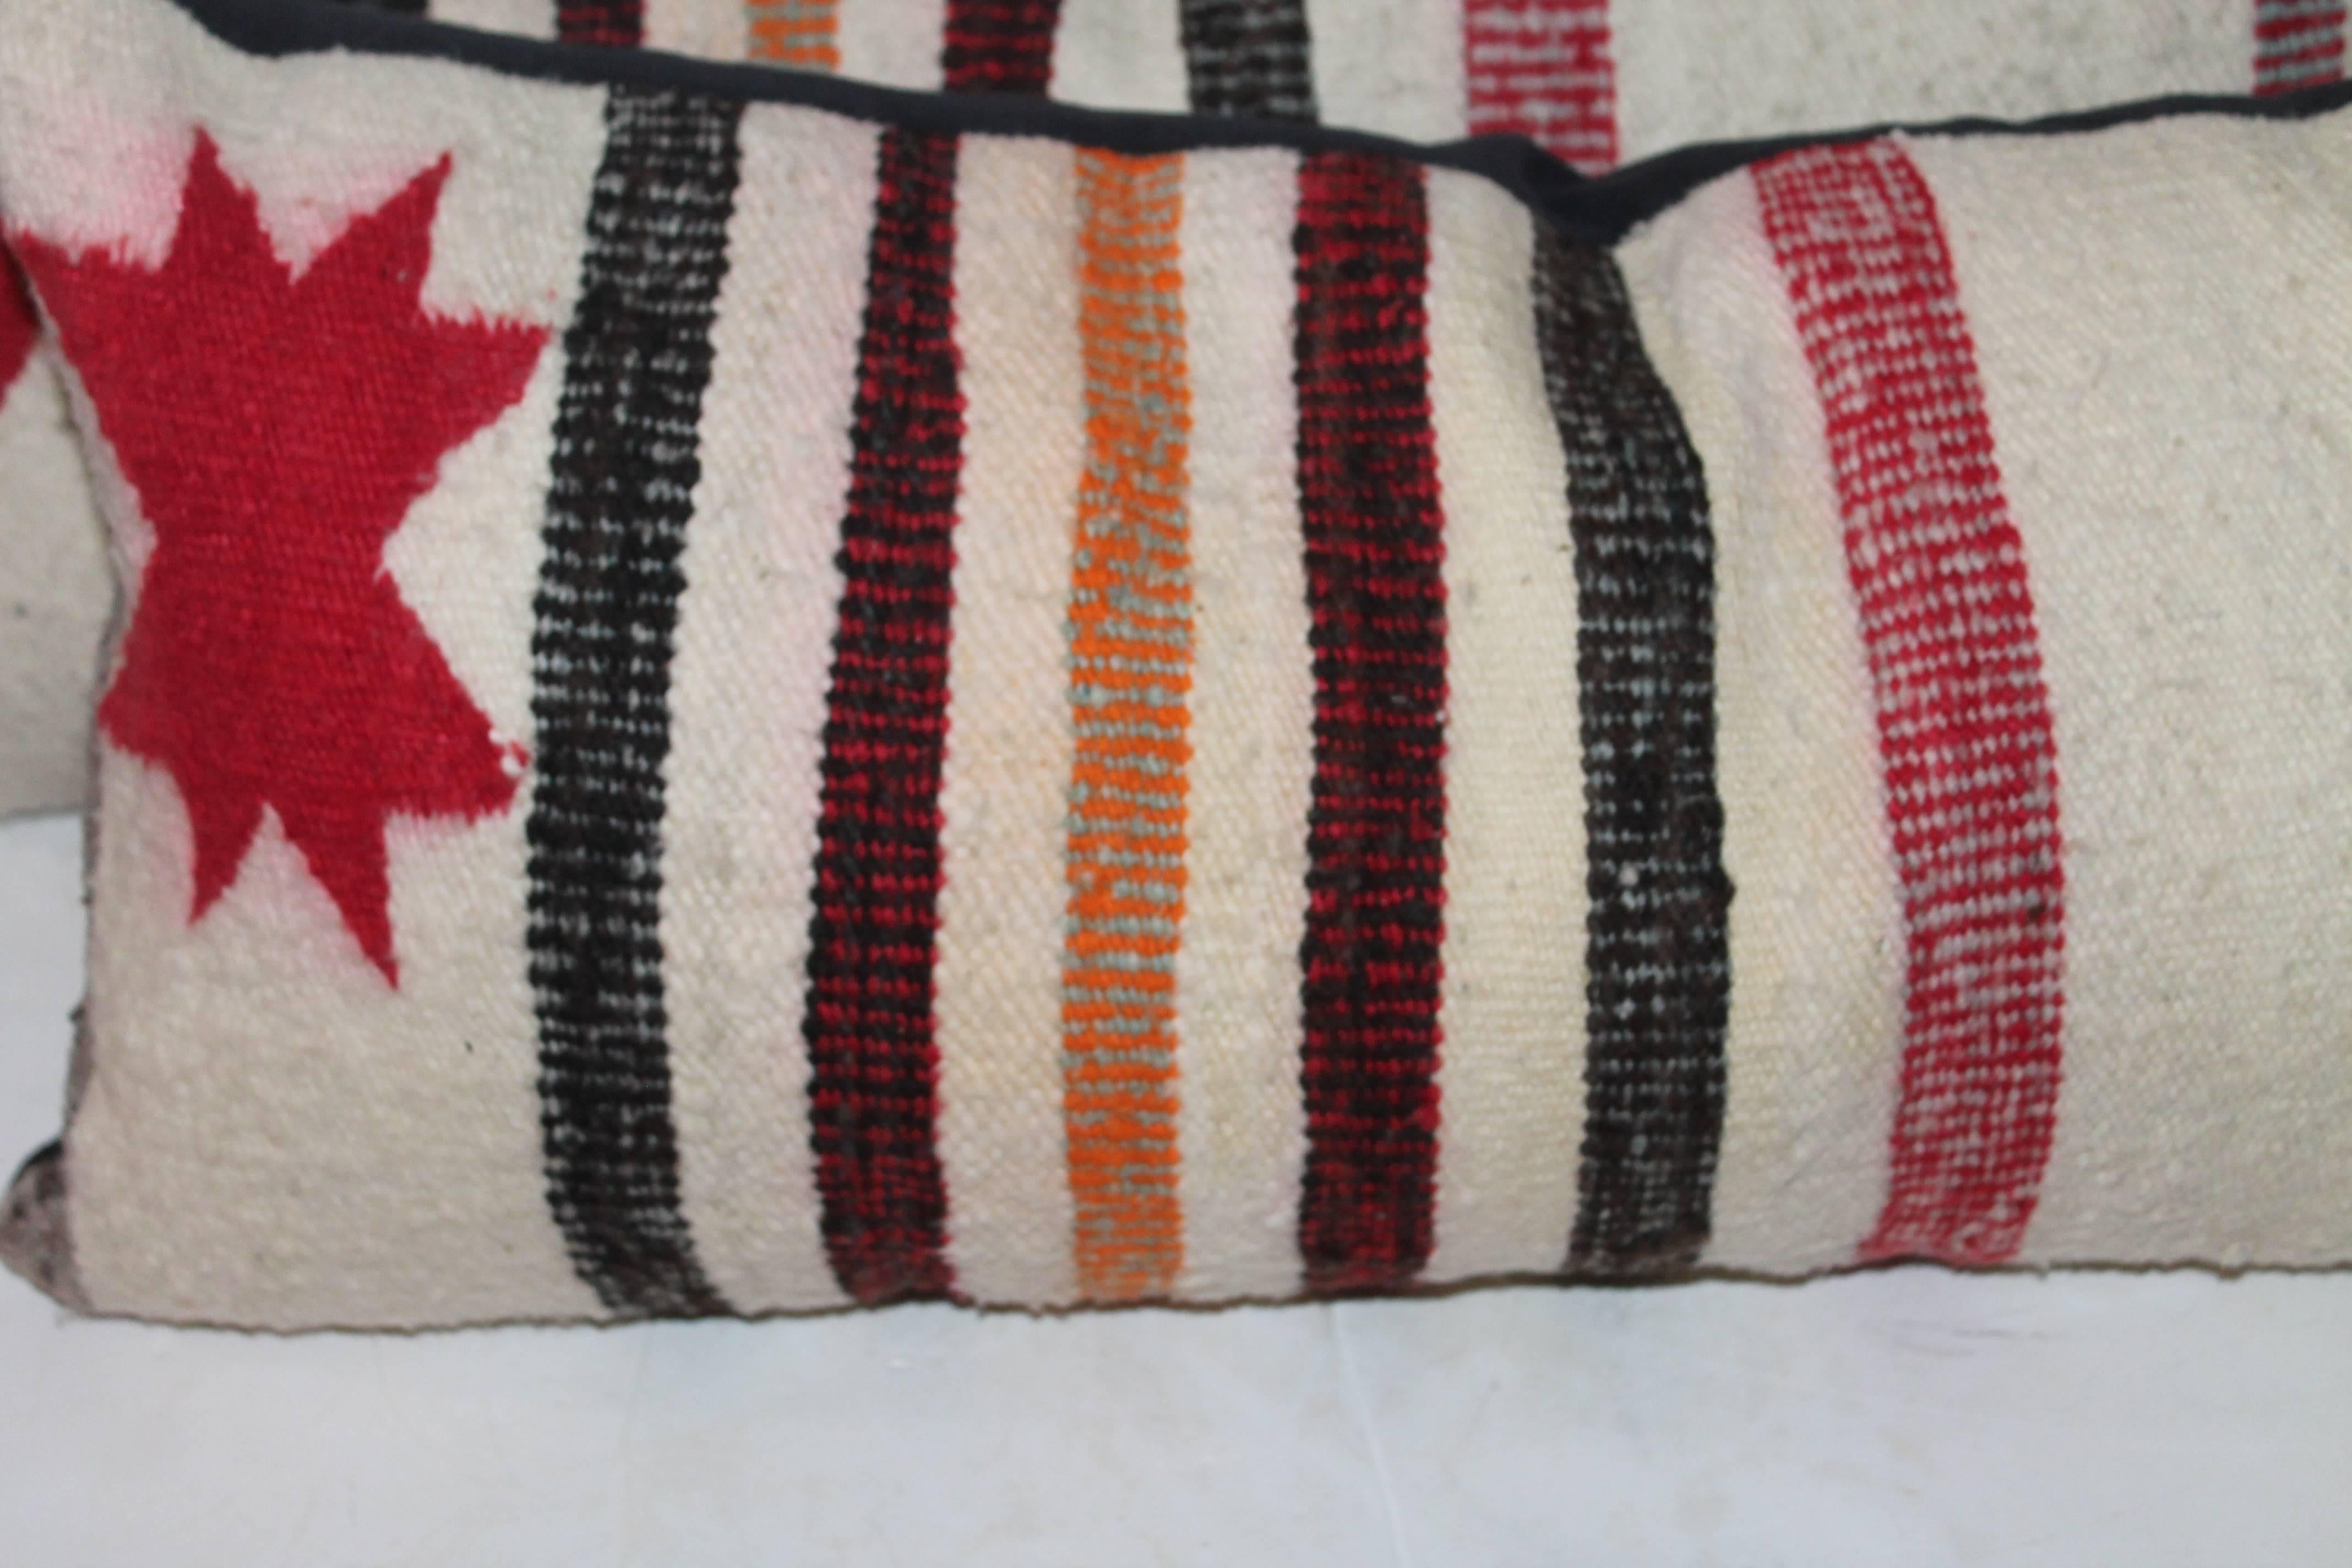 These saddle blanket weaving's have red stars pattern in the end corner of each pillow. There are two pairs in inventory. The backing is in a black cotton linen. Condition is very good. Sold in pairs.